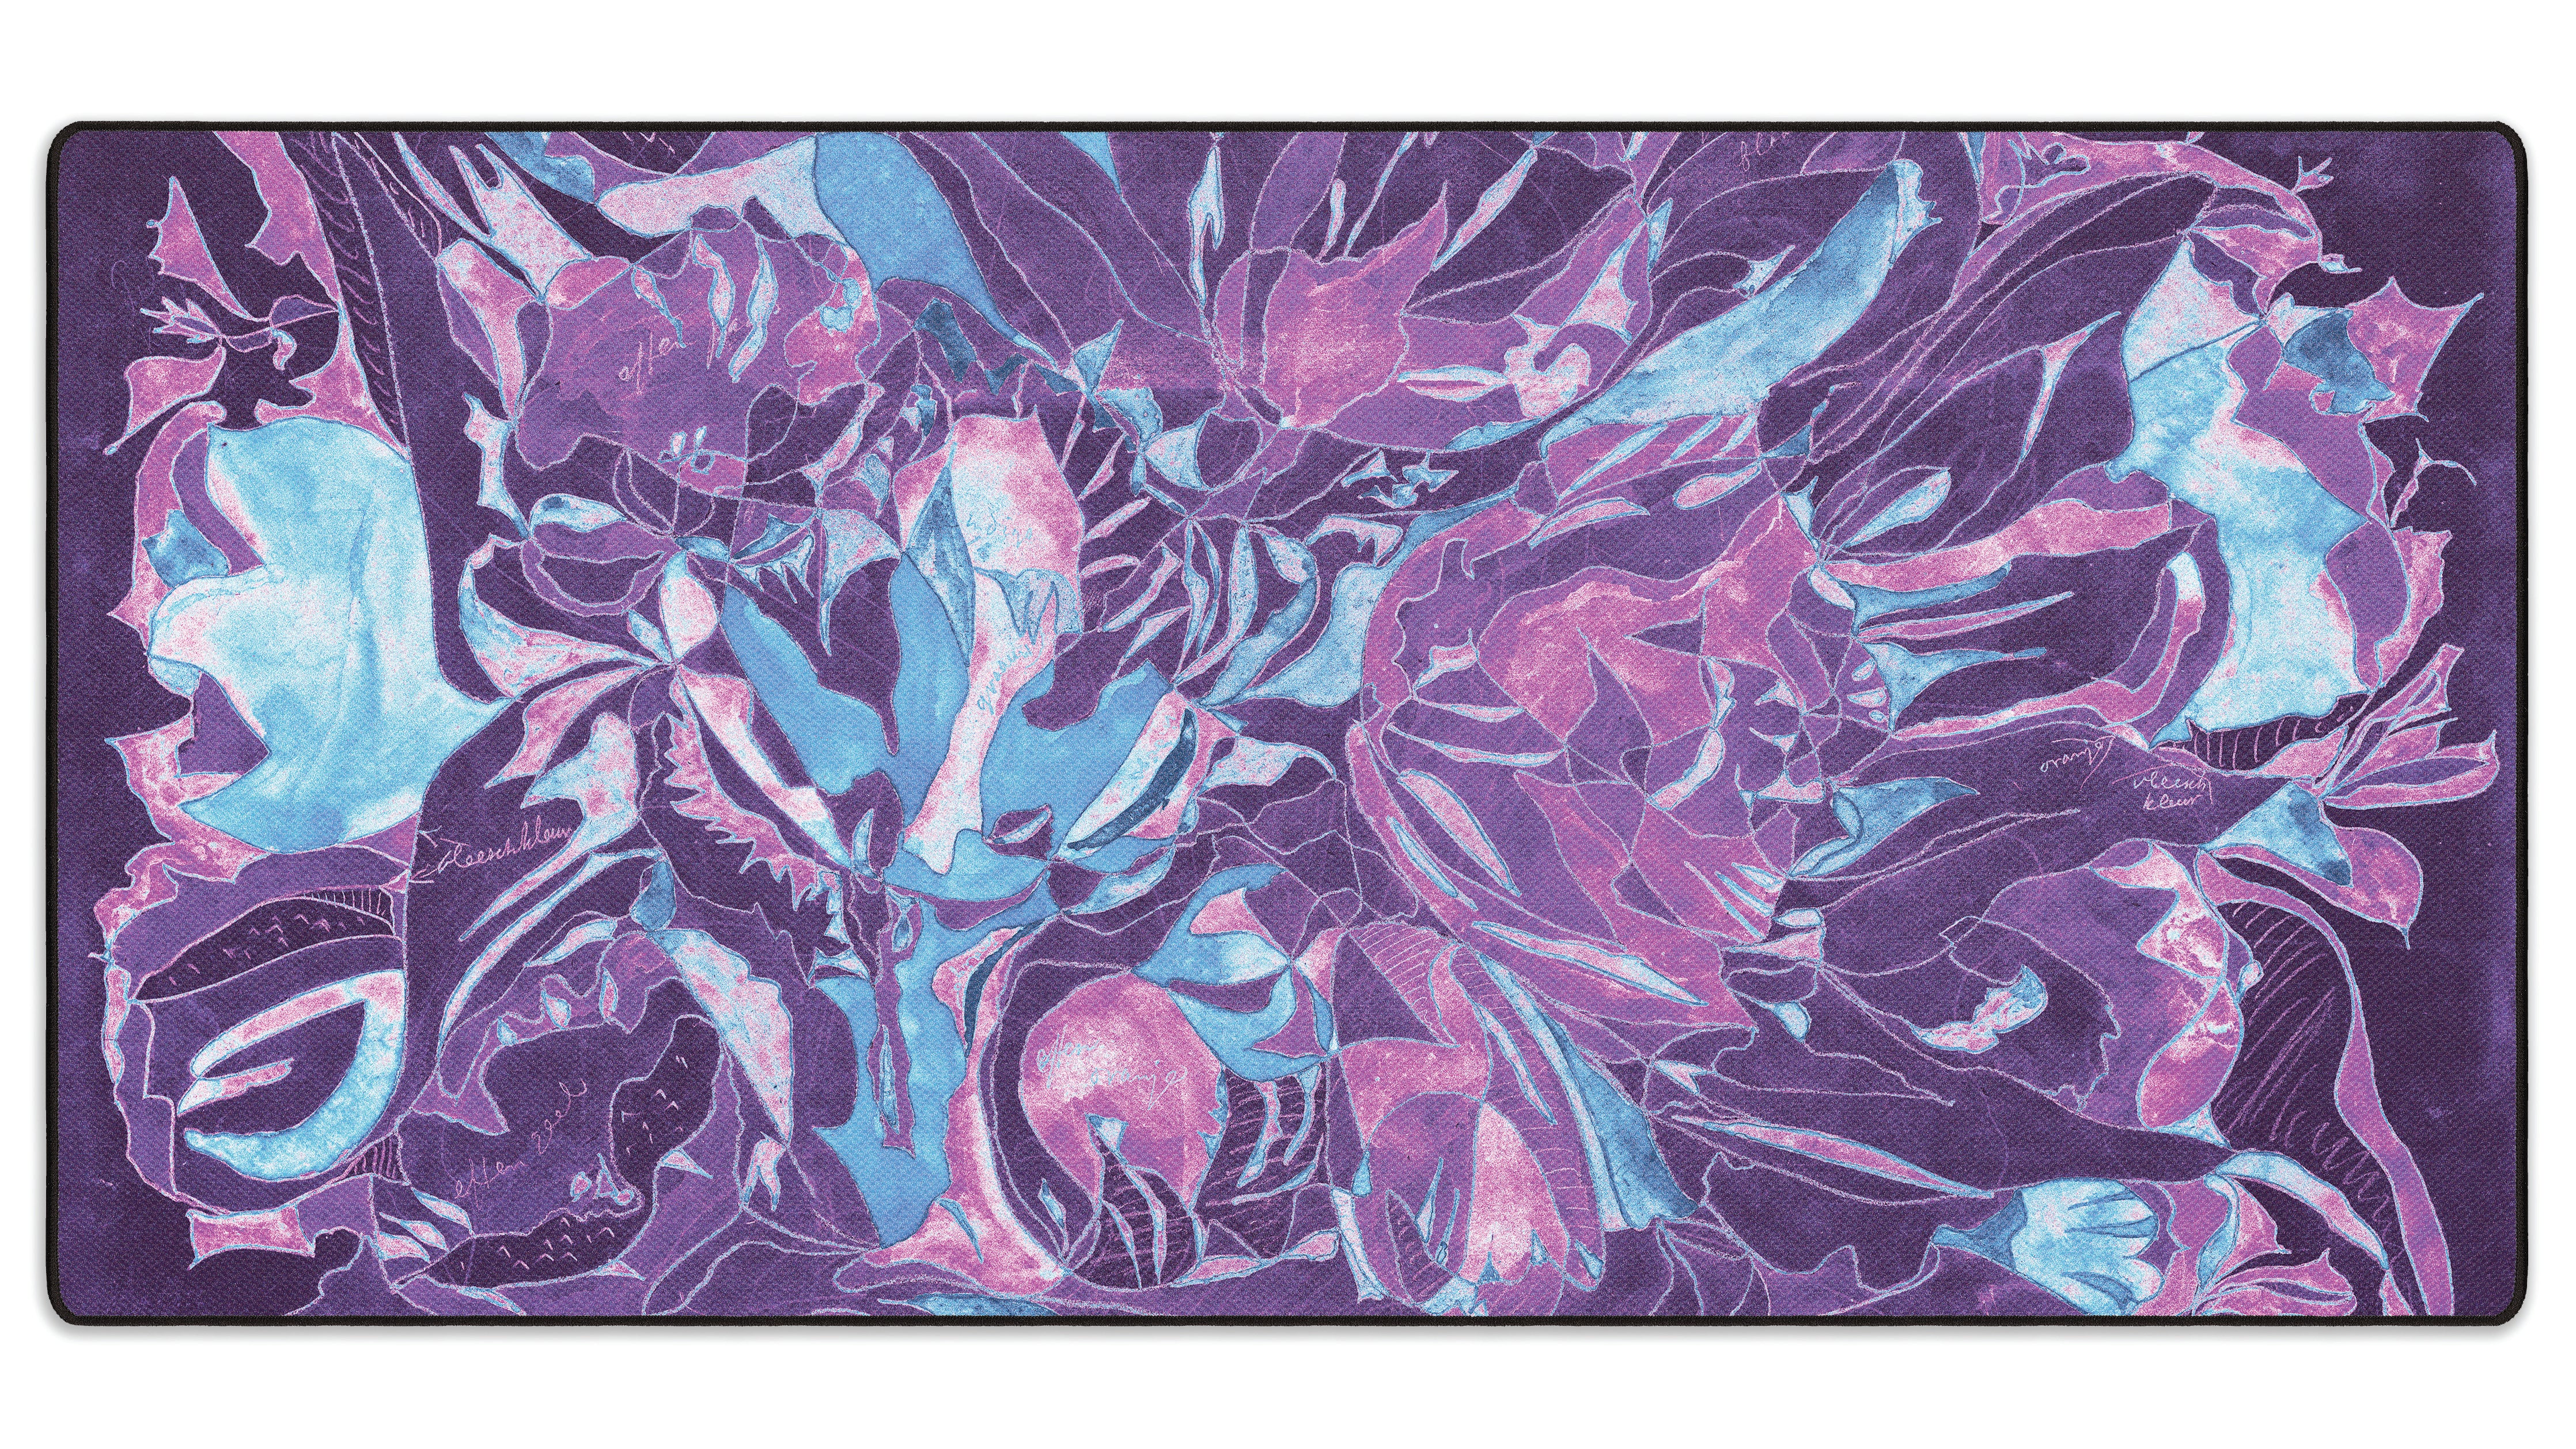 Flower Market, by Theodoor Colenbrander - The Mousepad Company